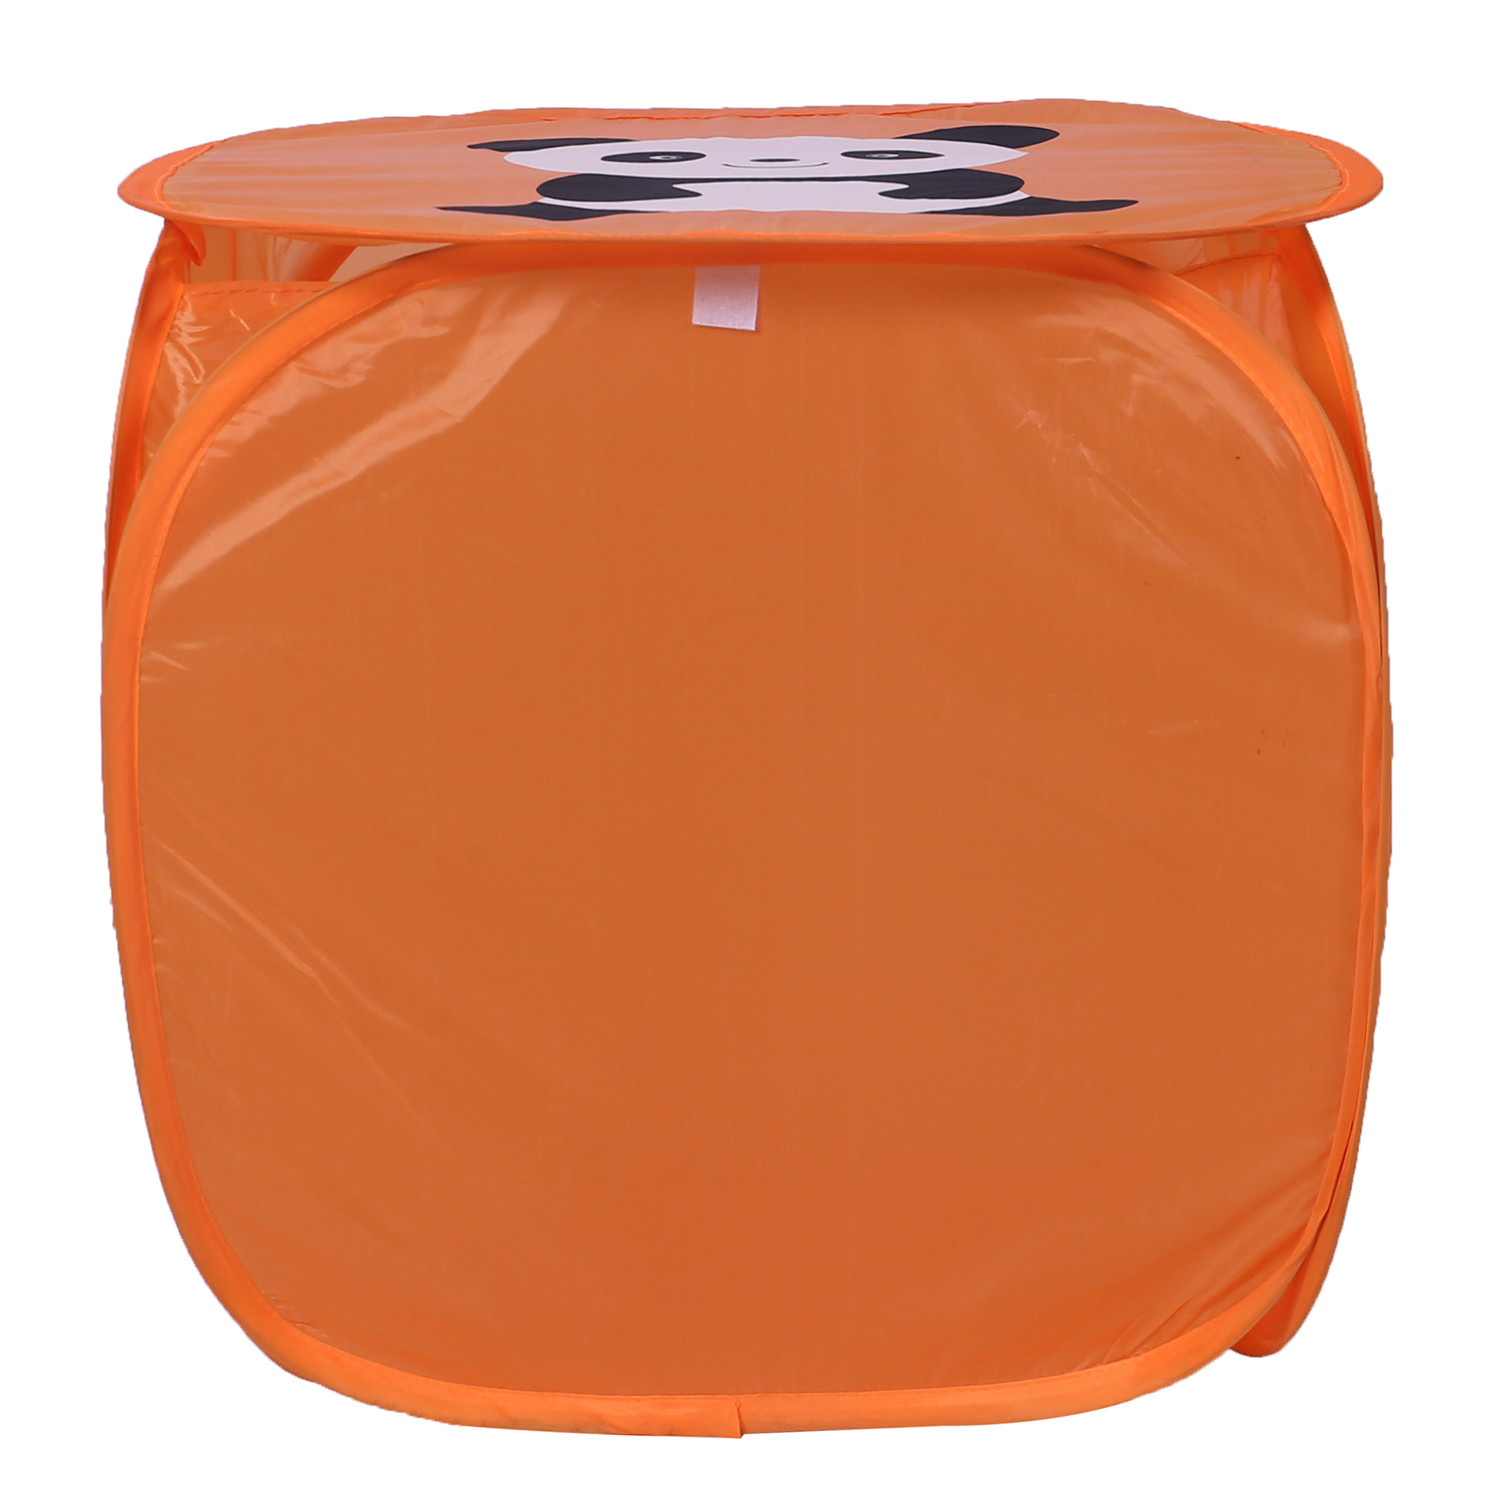 Kuber Industries Polyester Durable & Collapsible Panda Print Square Laundry Basket|Clothes Storage Box With Lid & Side Handles,45 Ltr.(Orange)